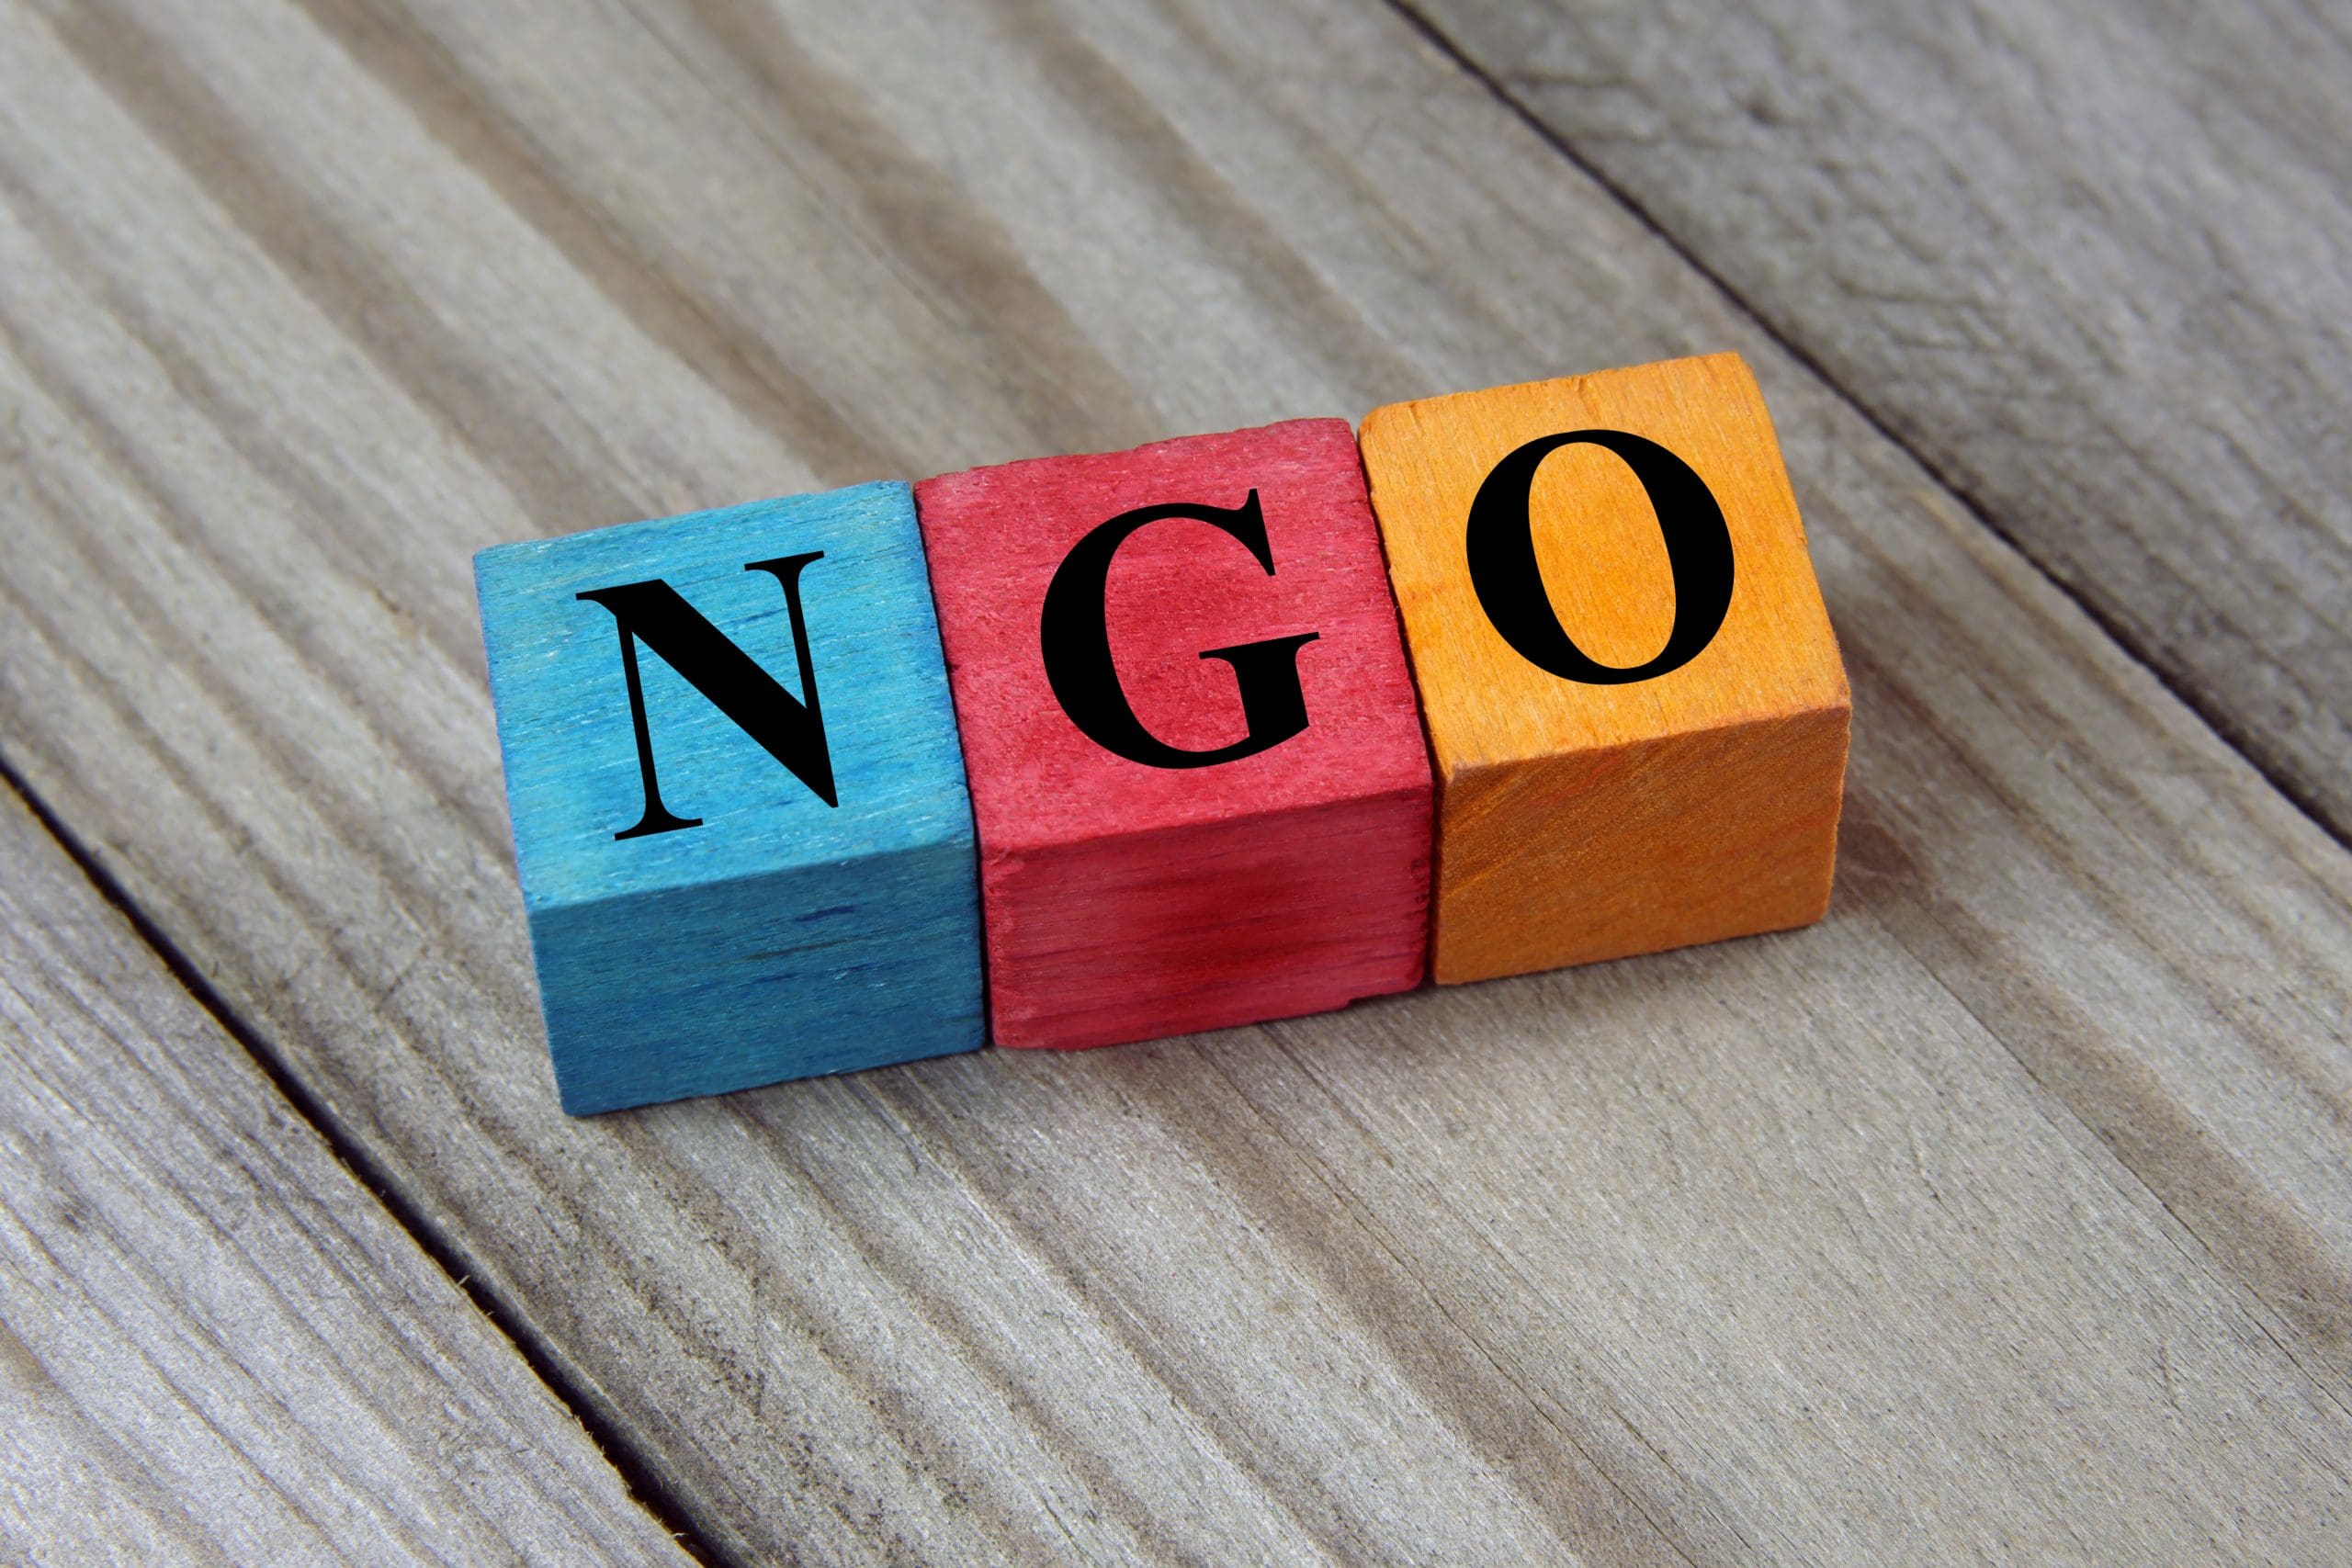 A wooden block with the word ngo on it.